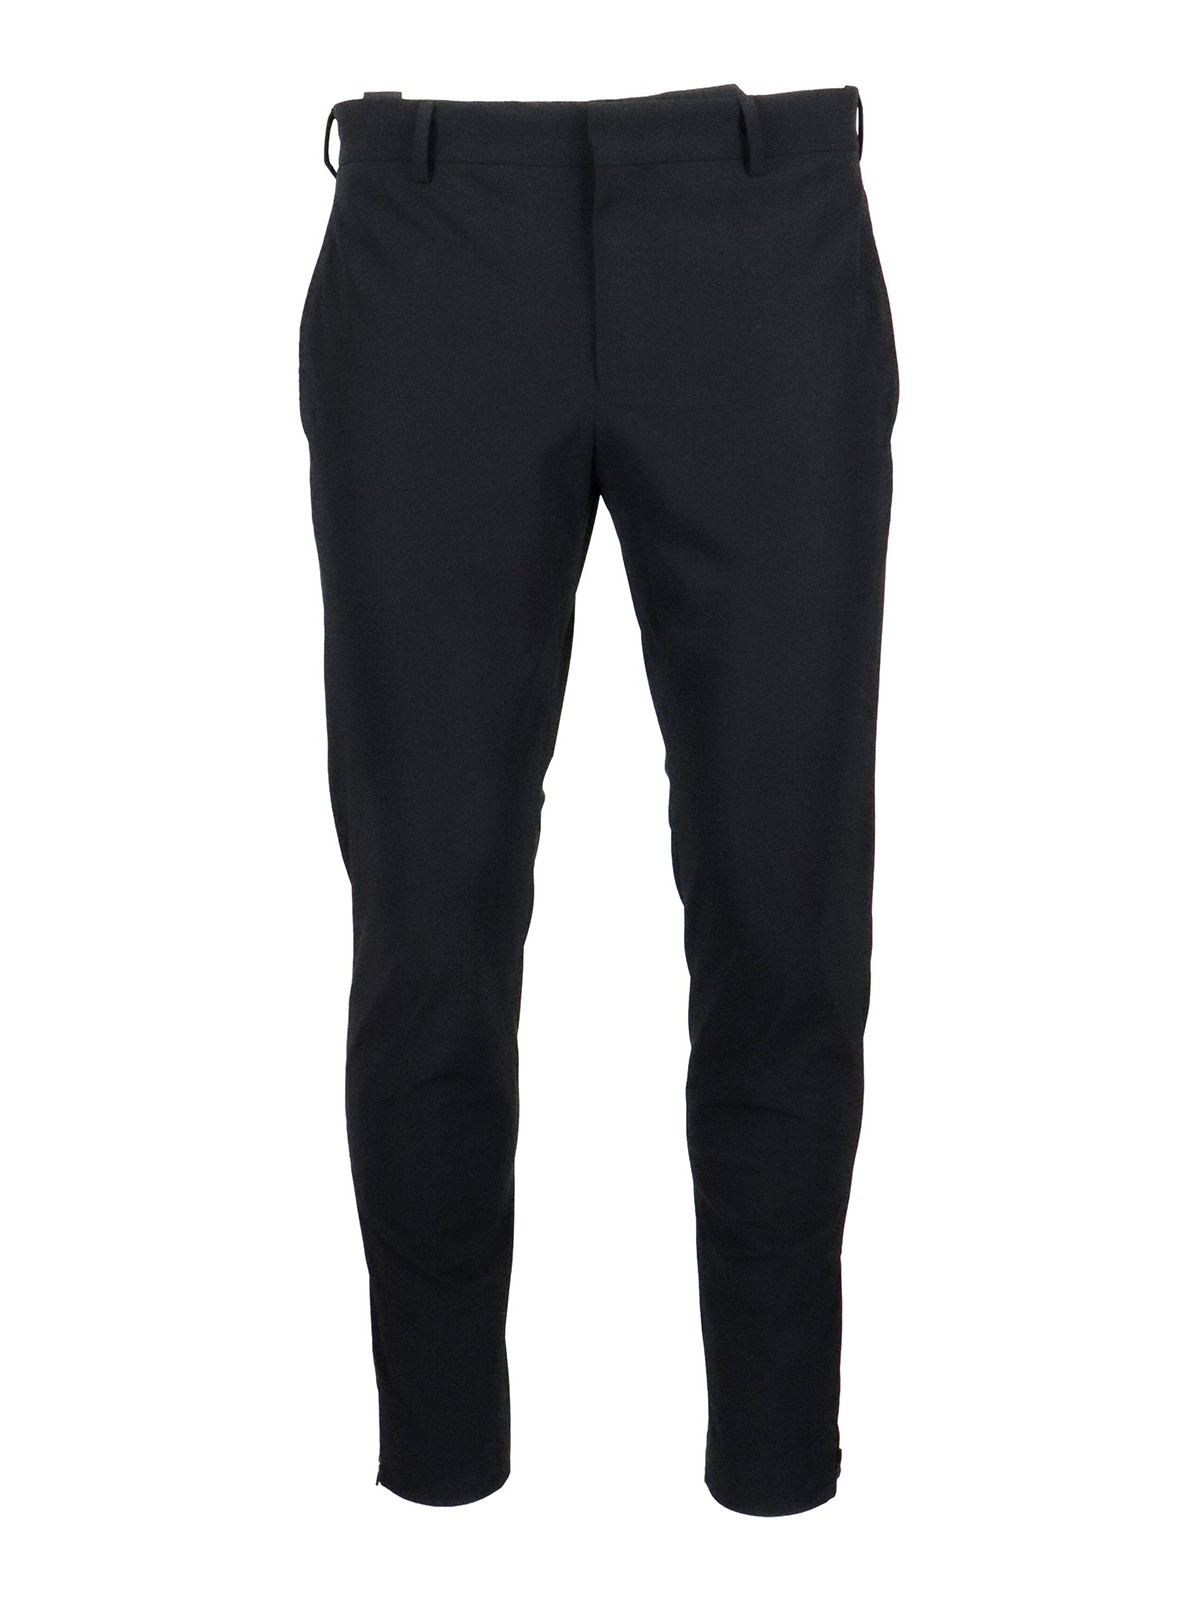 PT TORINO ACTIVE TROUSERS